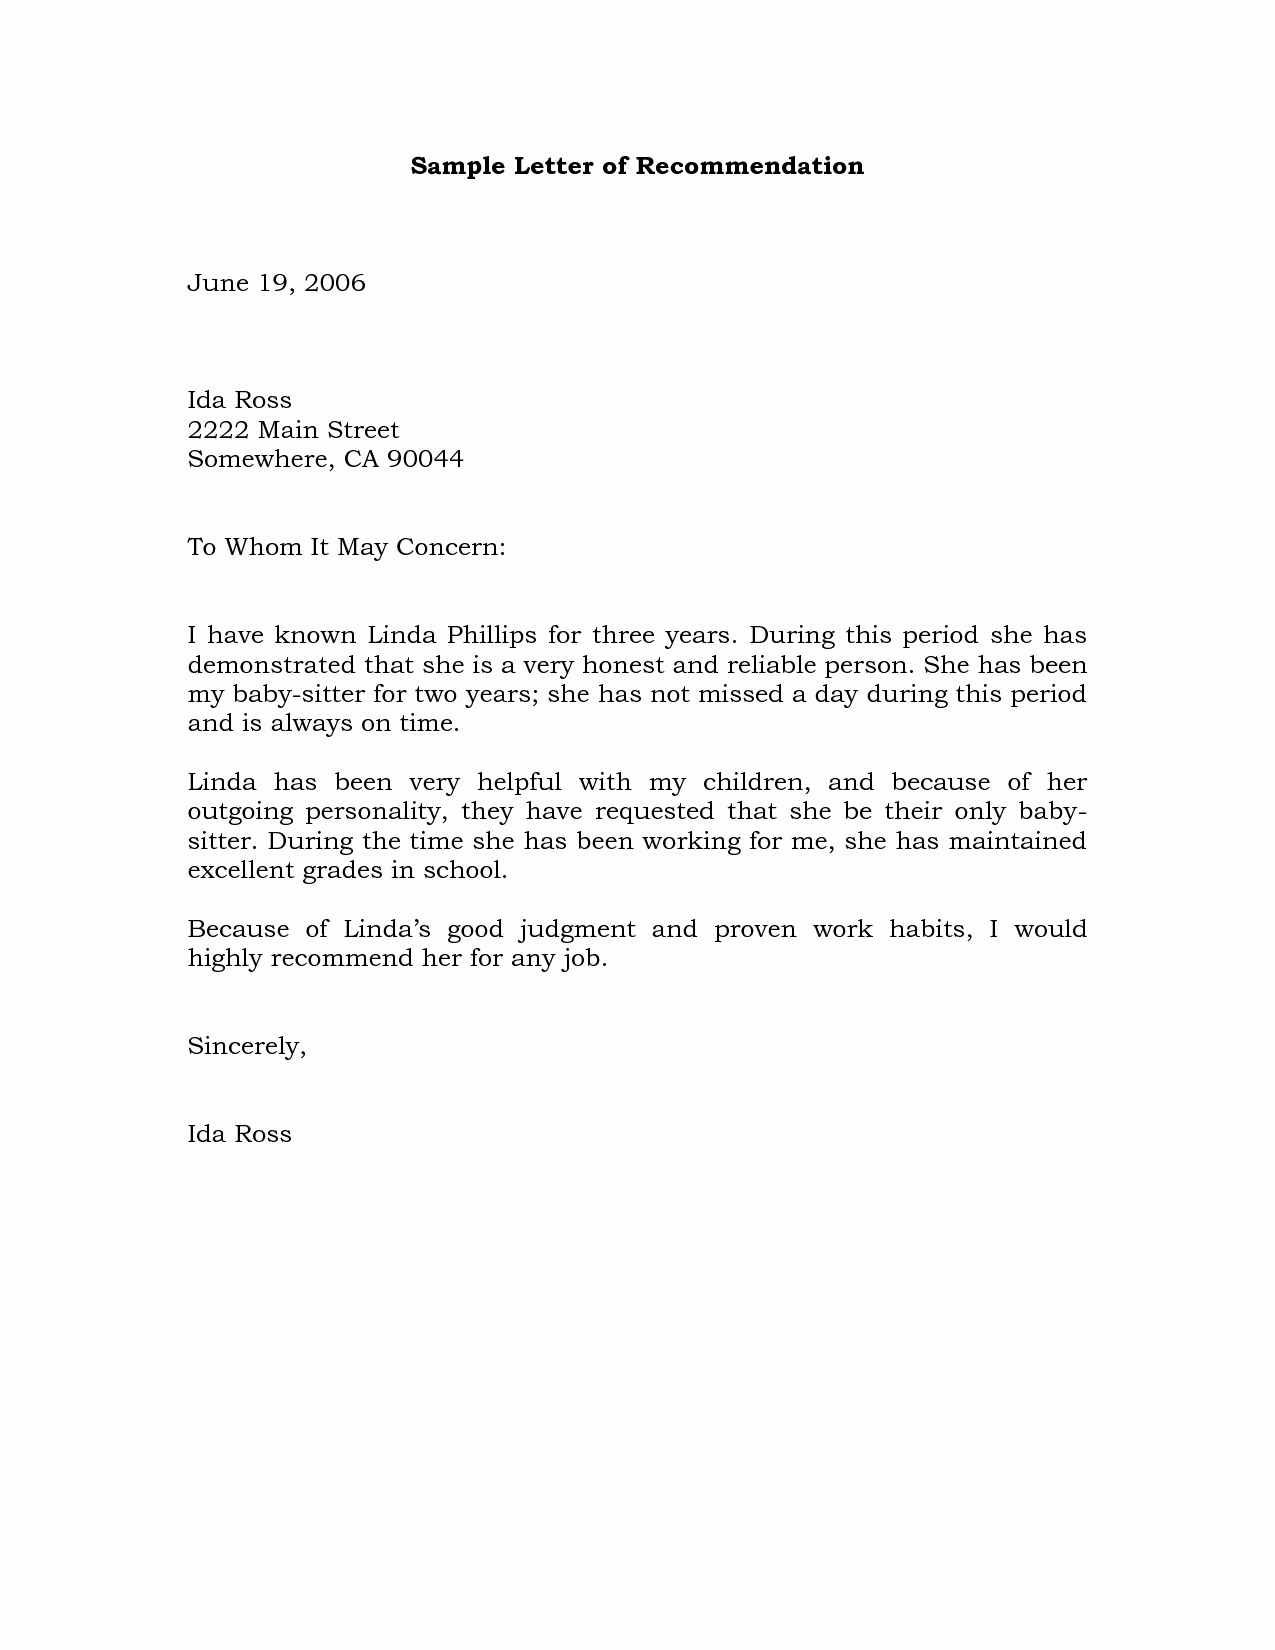 Template Letter Of Recommendation Fresh Sample Re Mendation Letter Example